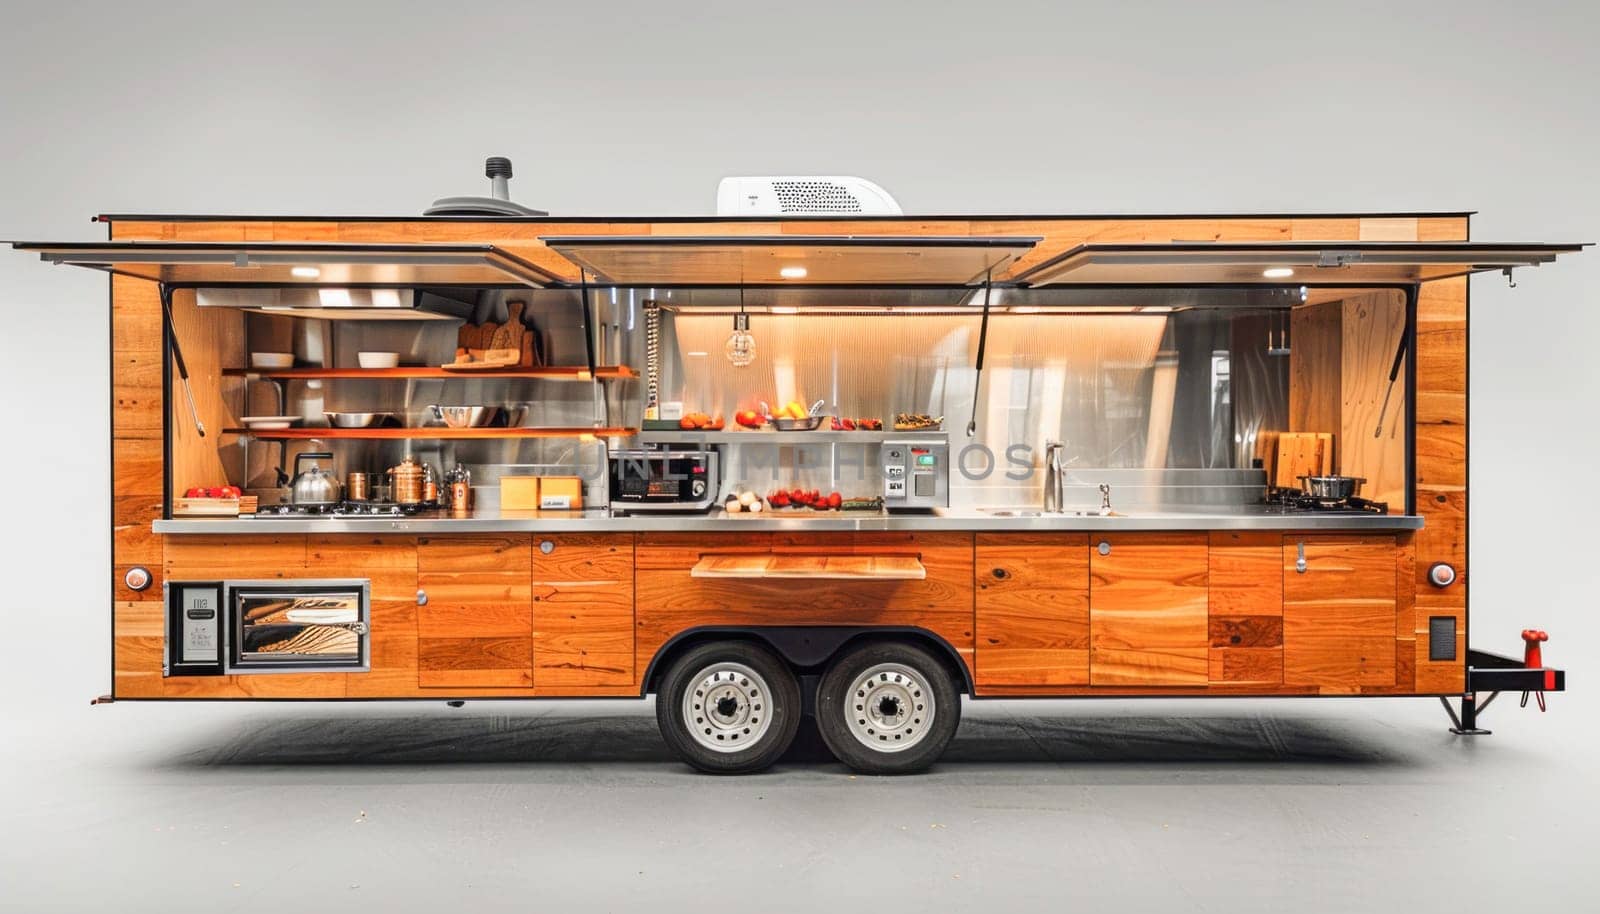 A charming wooden food truck is parked on a pristine white platform, emitting a picturesque atmosphere